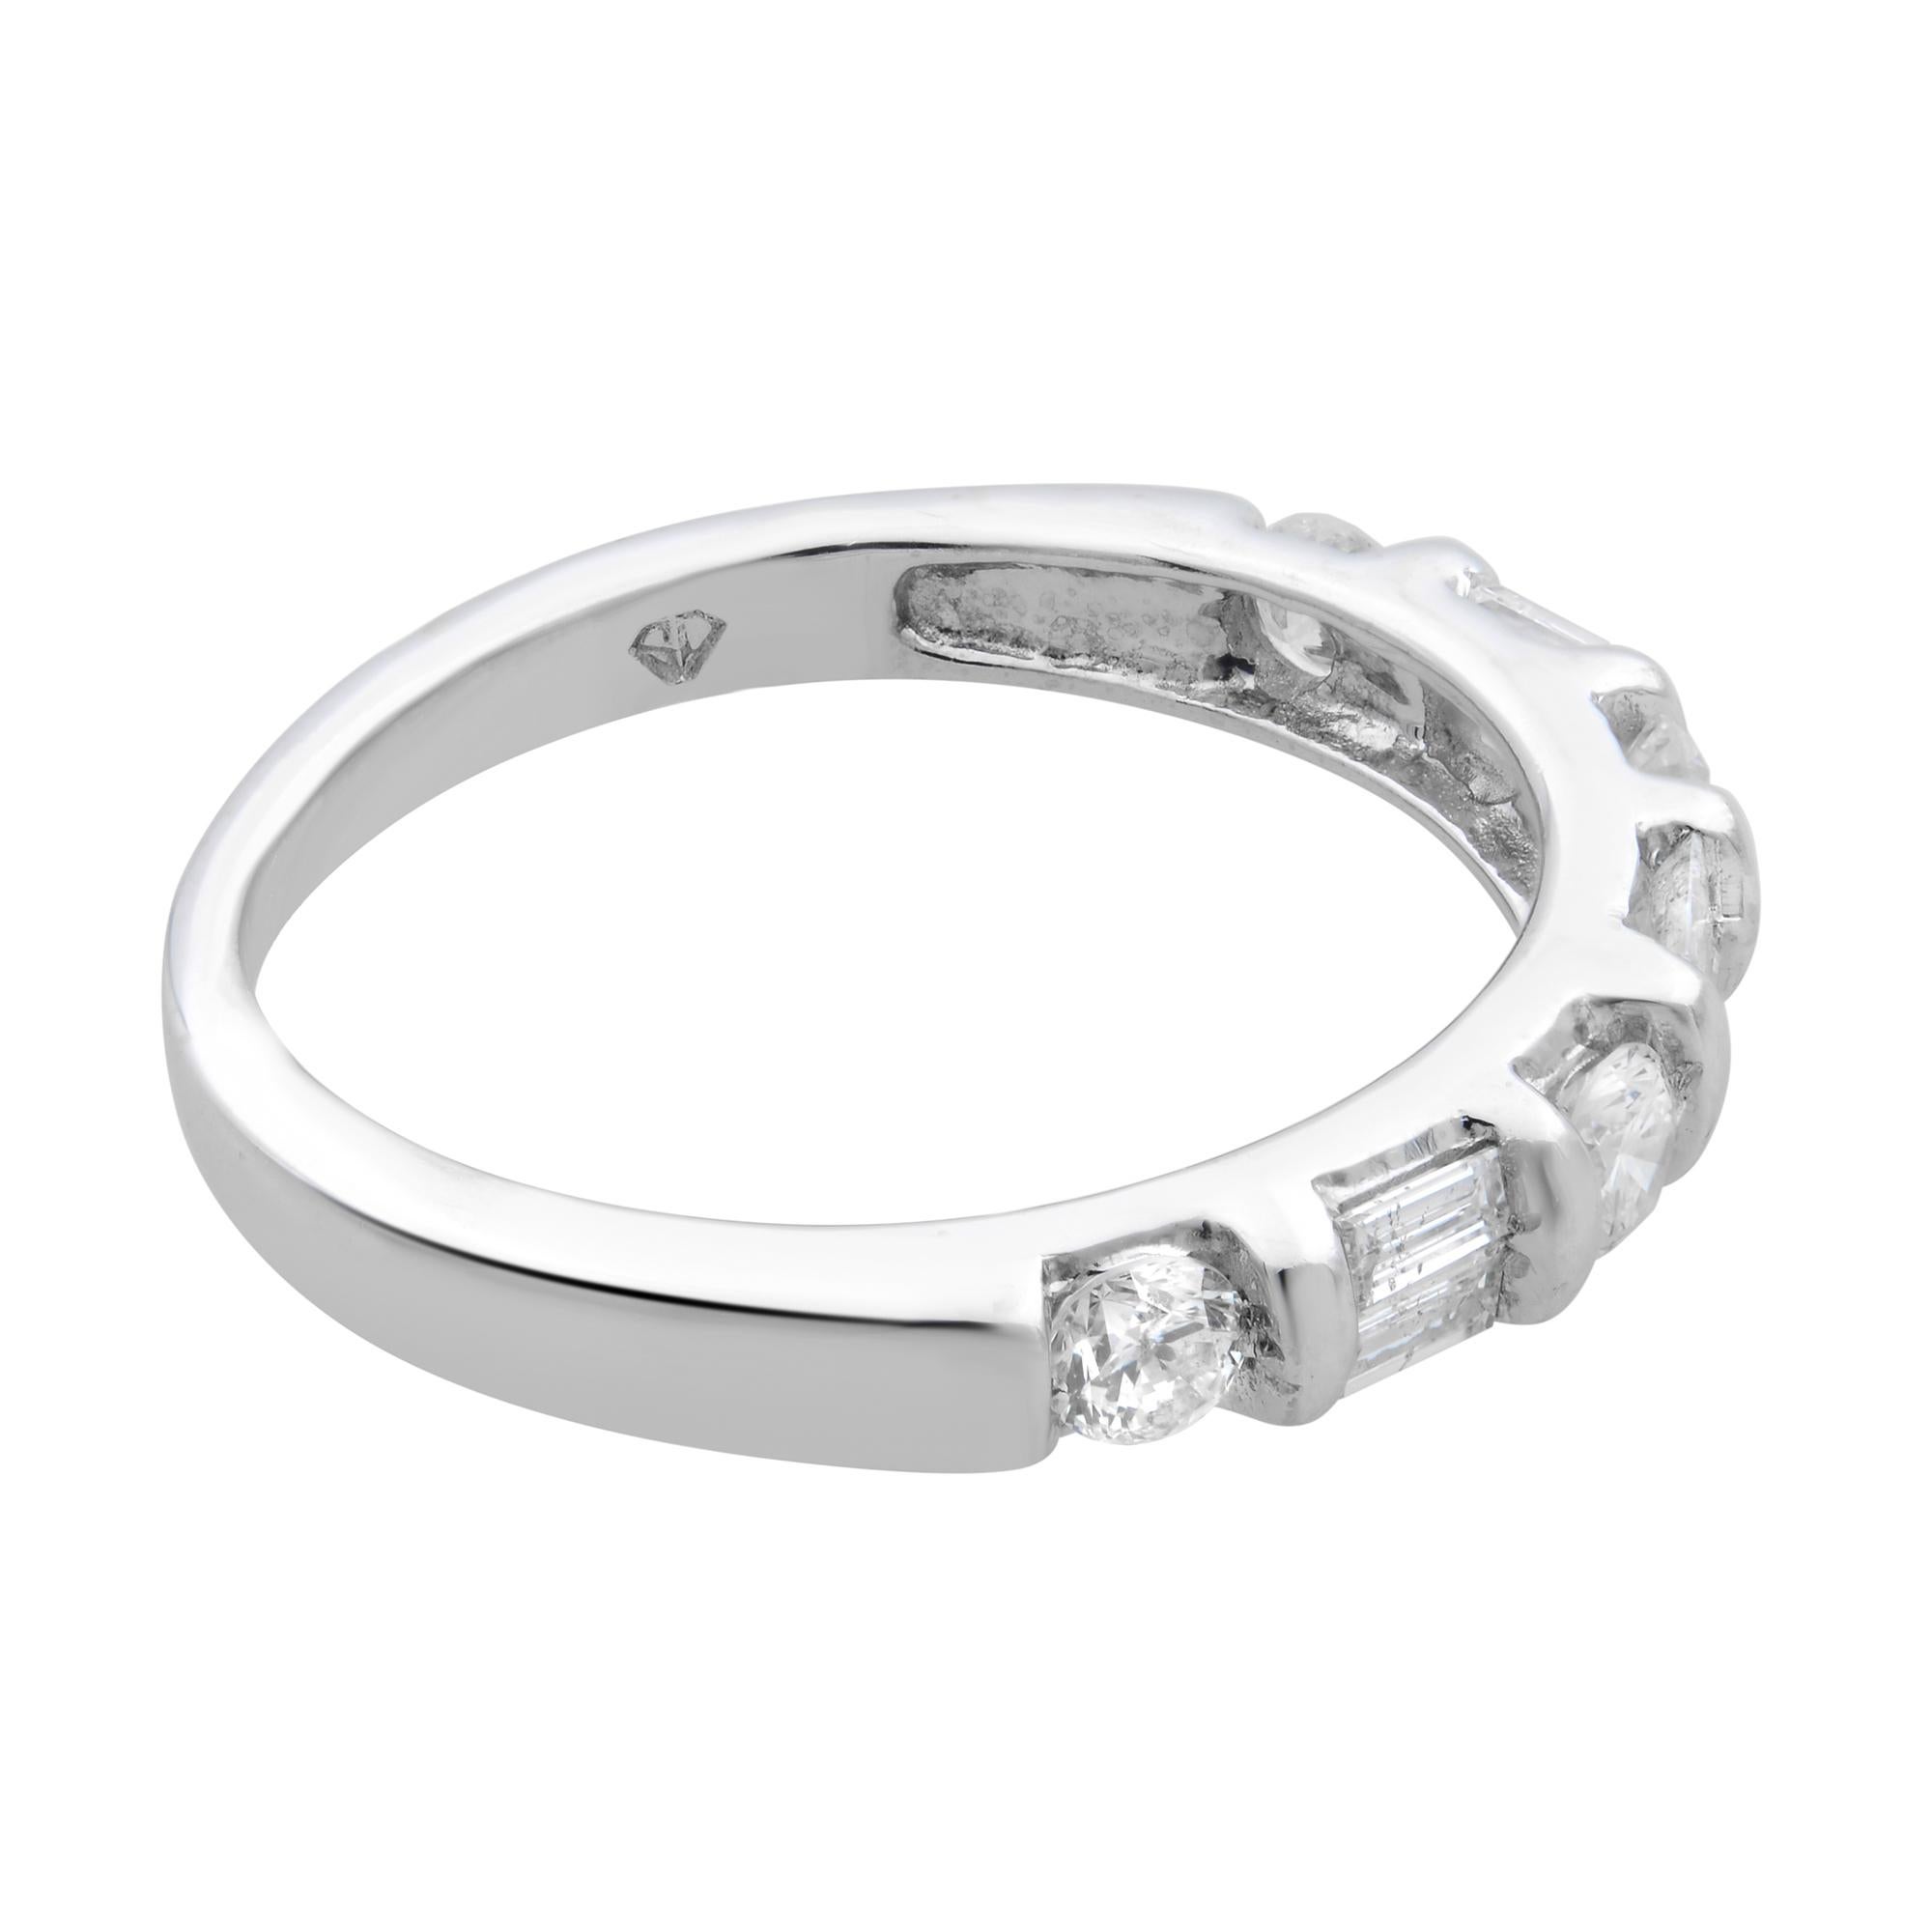 Rachel Koen Diamond Band Ring 14K White Gold 0.75cttw In New Condition For Sale In New York, NY